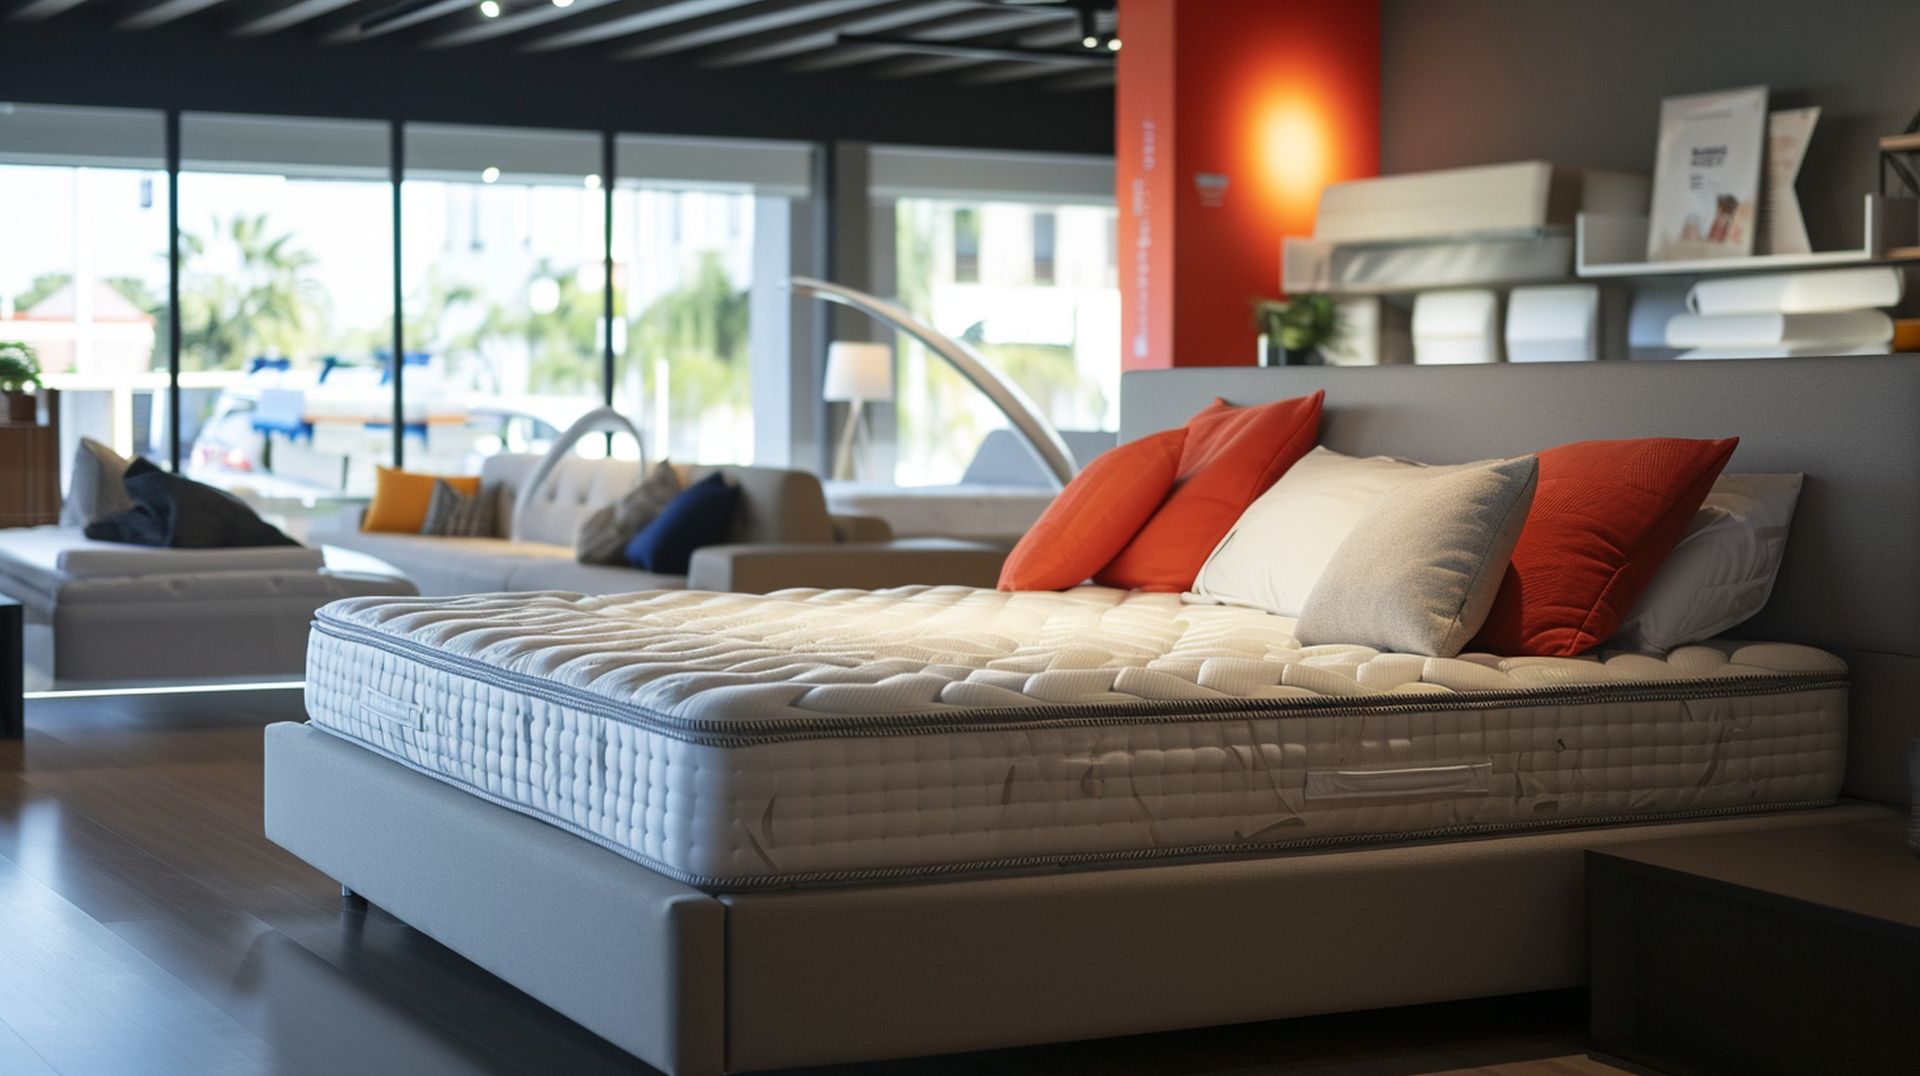 Types of mattresses at mattress dealers in Waltham, MA